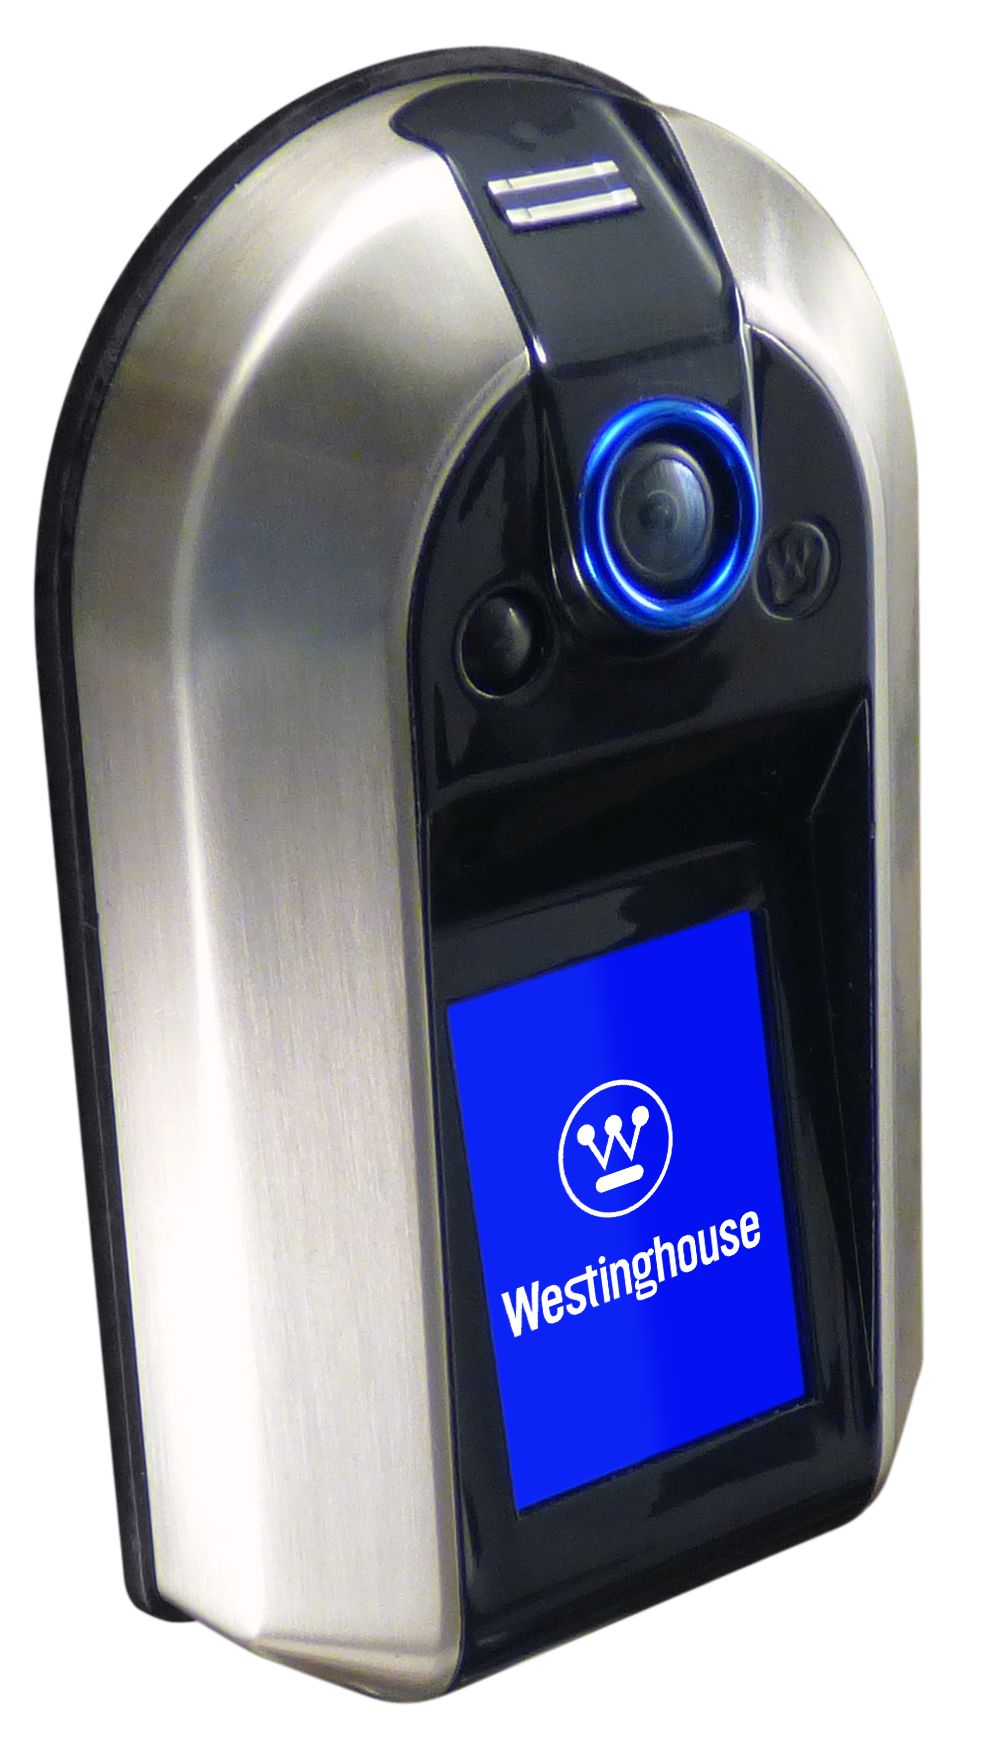 Thanks to Westinghouse, Who Needs a Spare Key These Days?